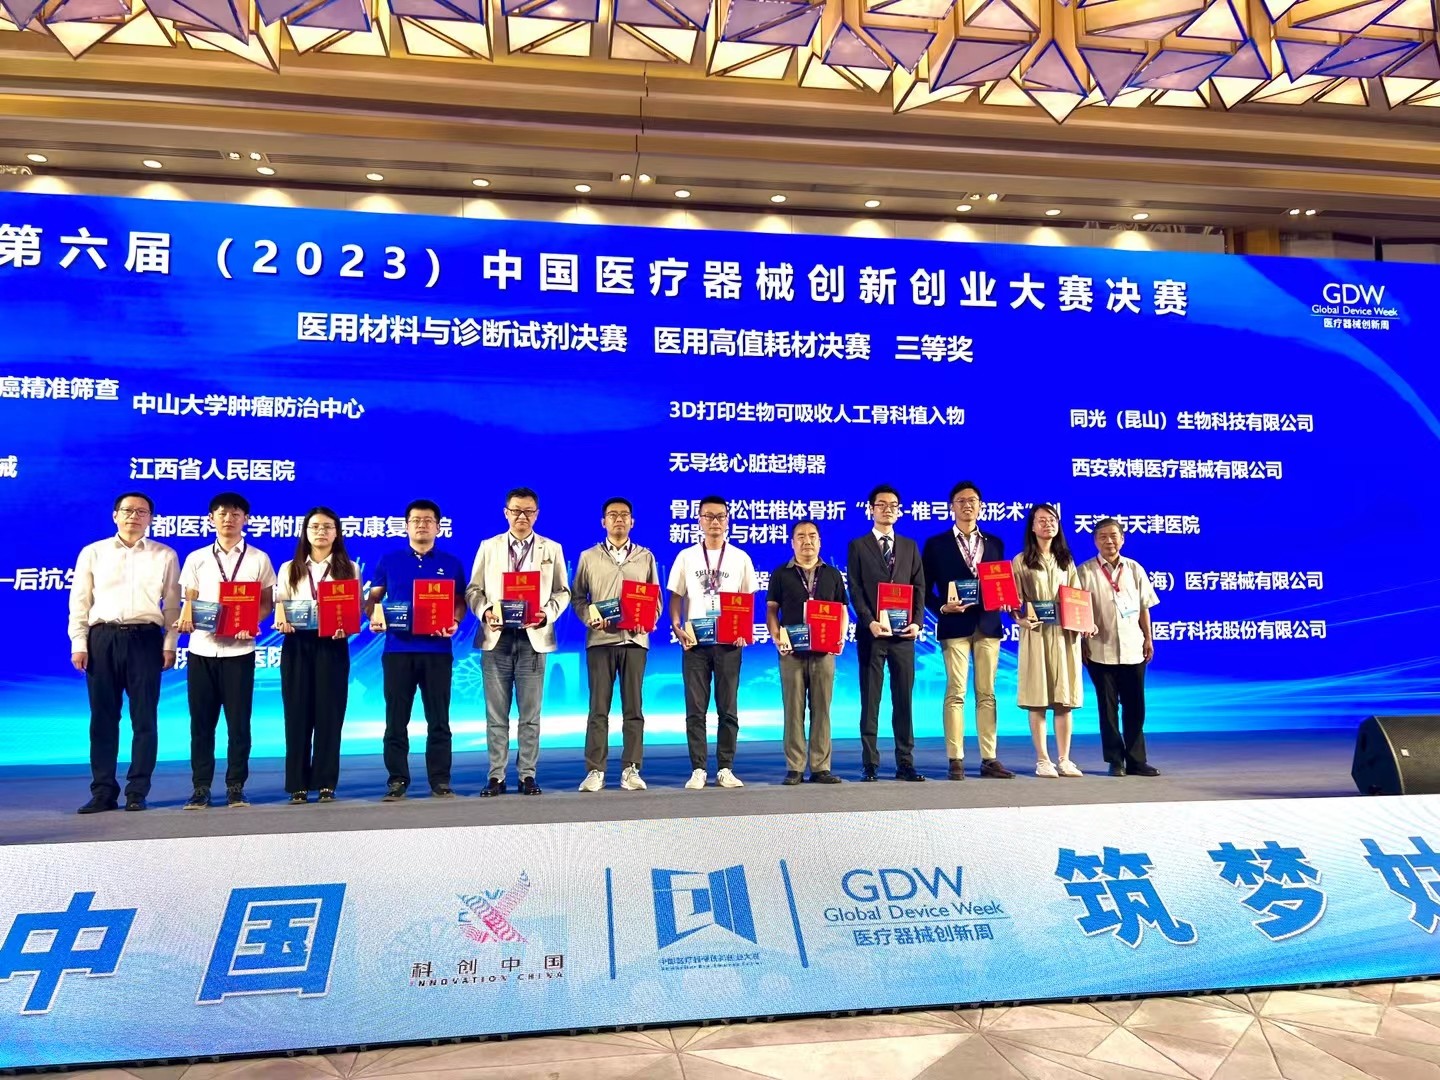 T-Bright Biotechnology Won Third Prize in the Final of the 6th China Medical Device Competition